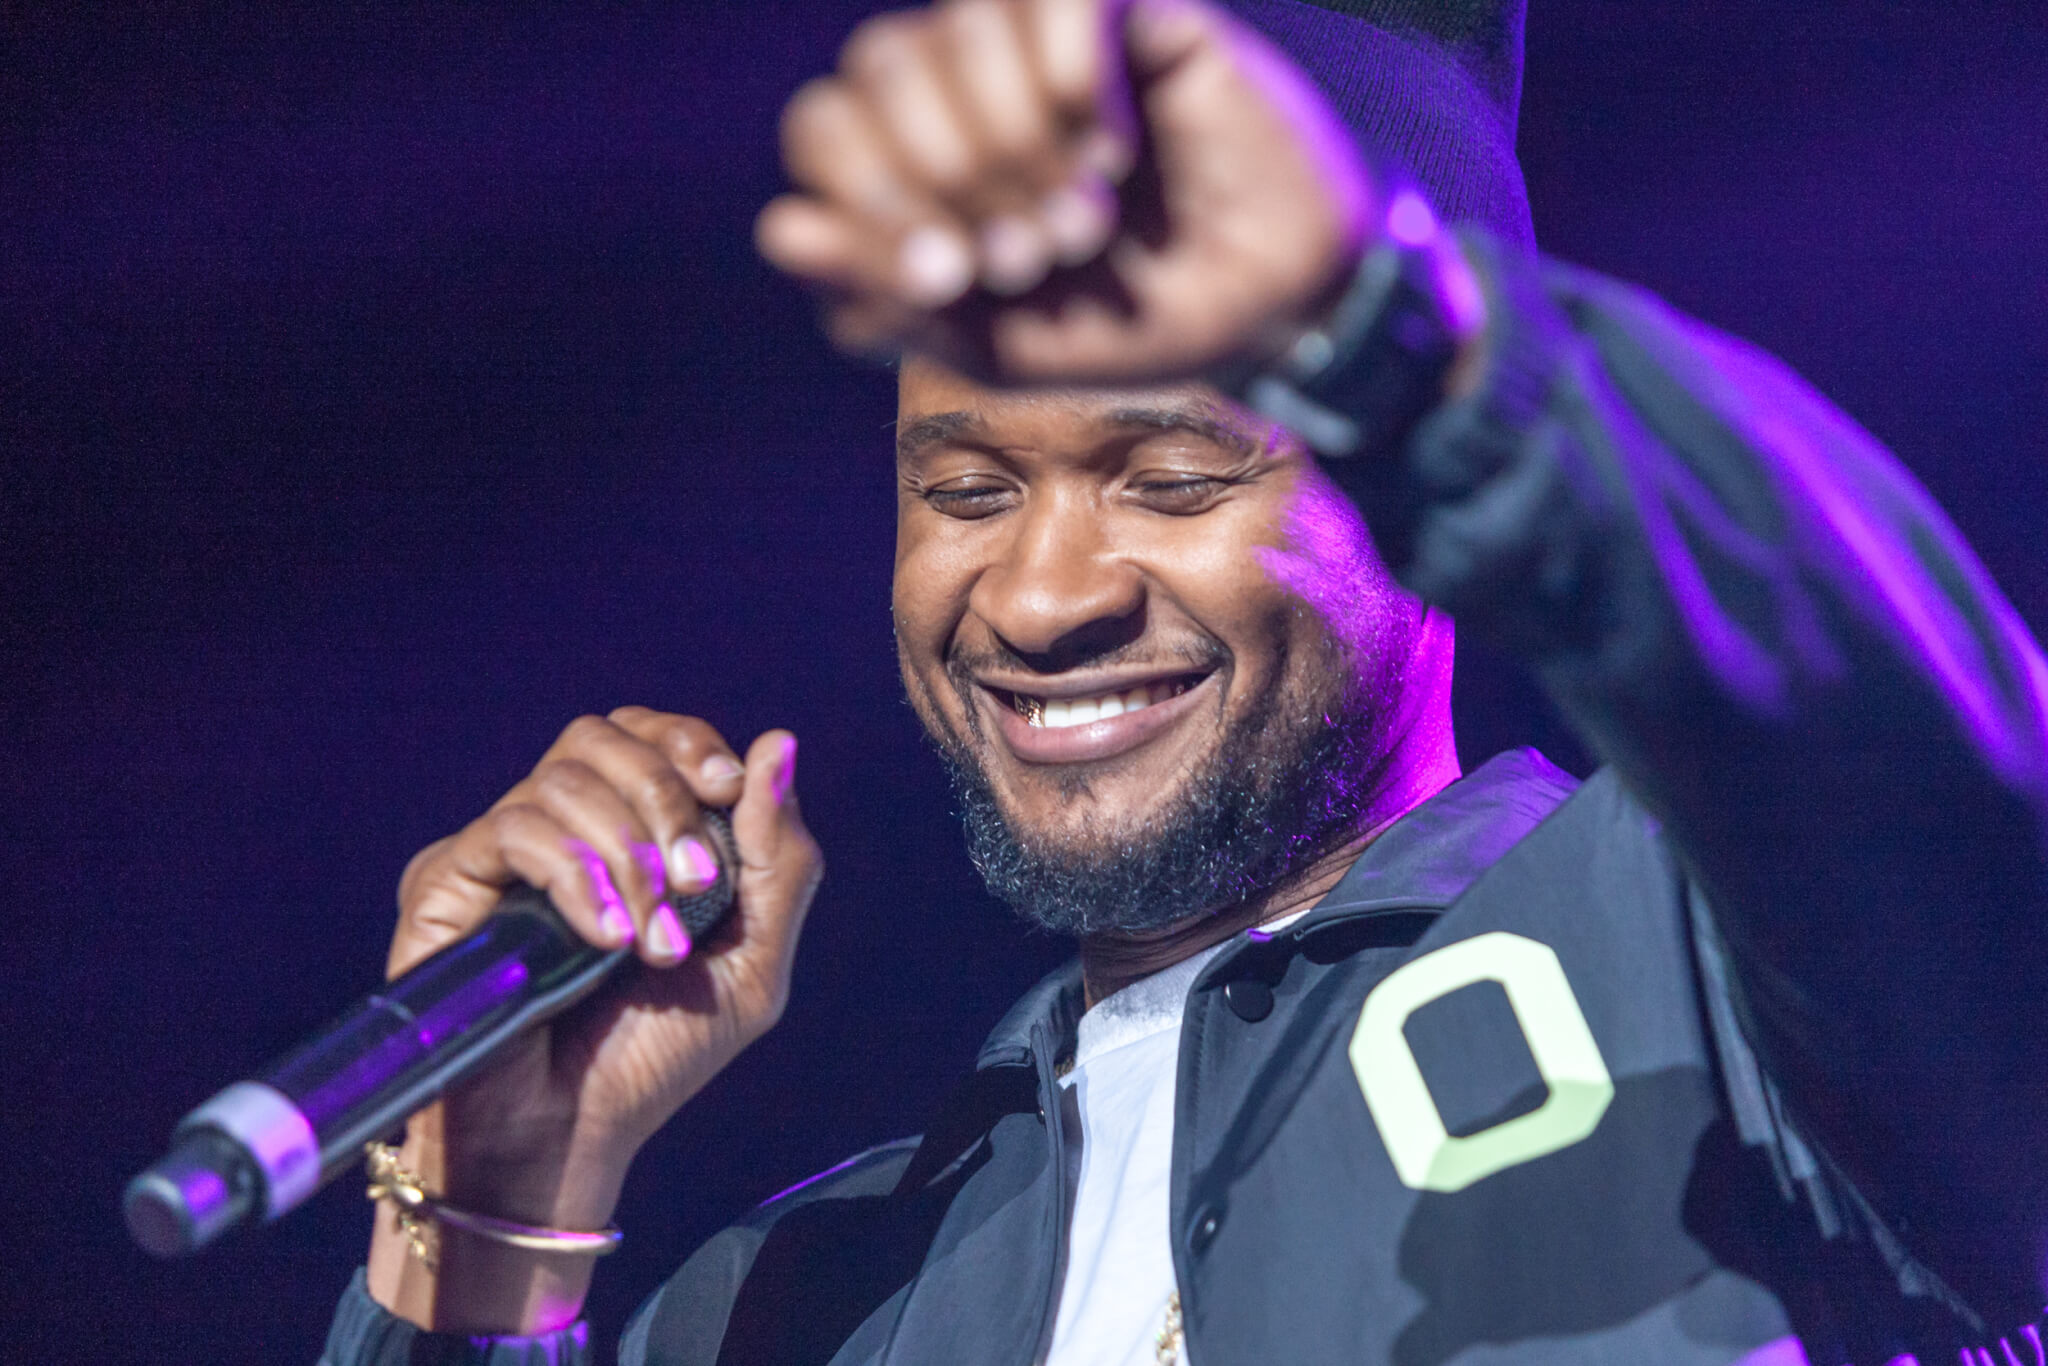 Usher attended the 2nd Annual V103 Winterfest Concert in 2016